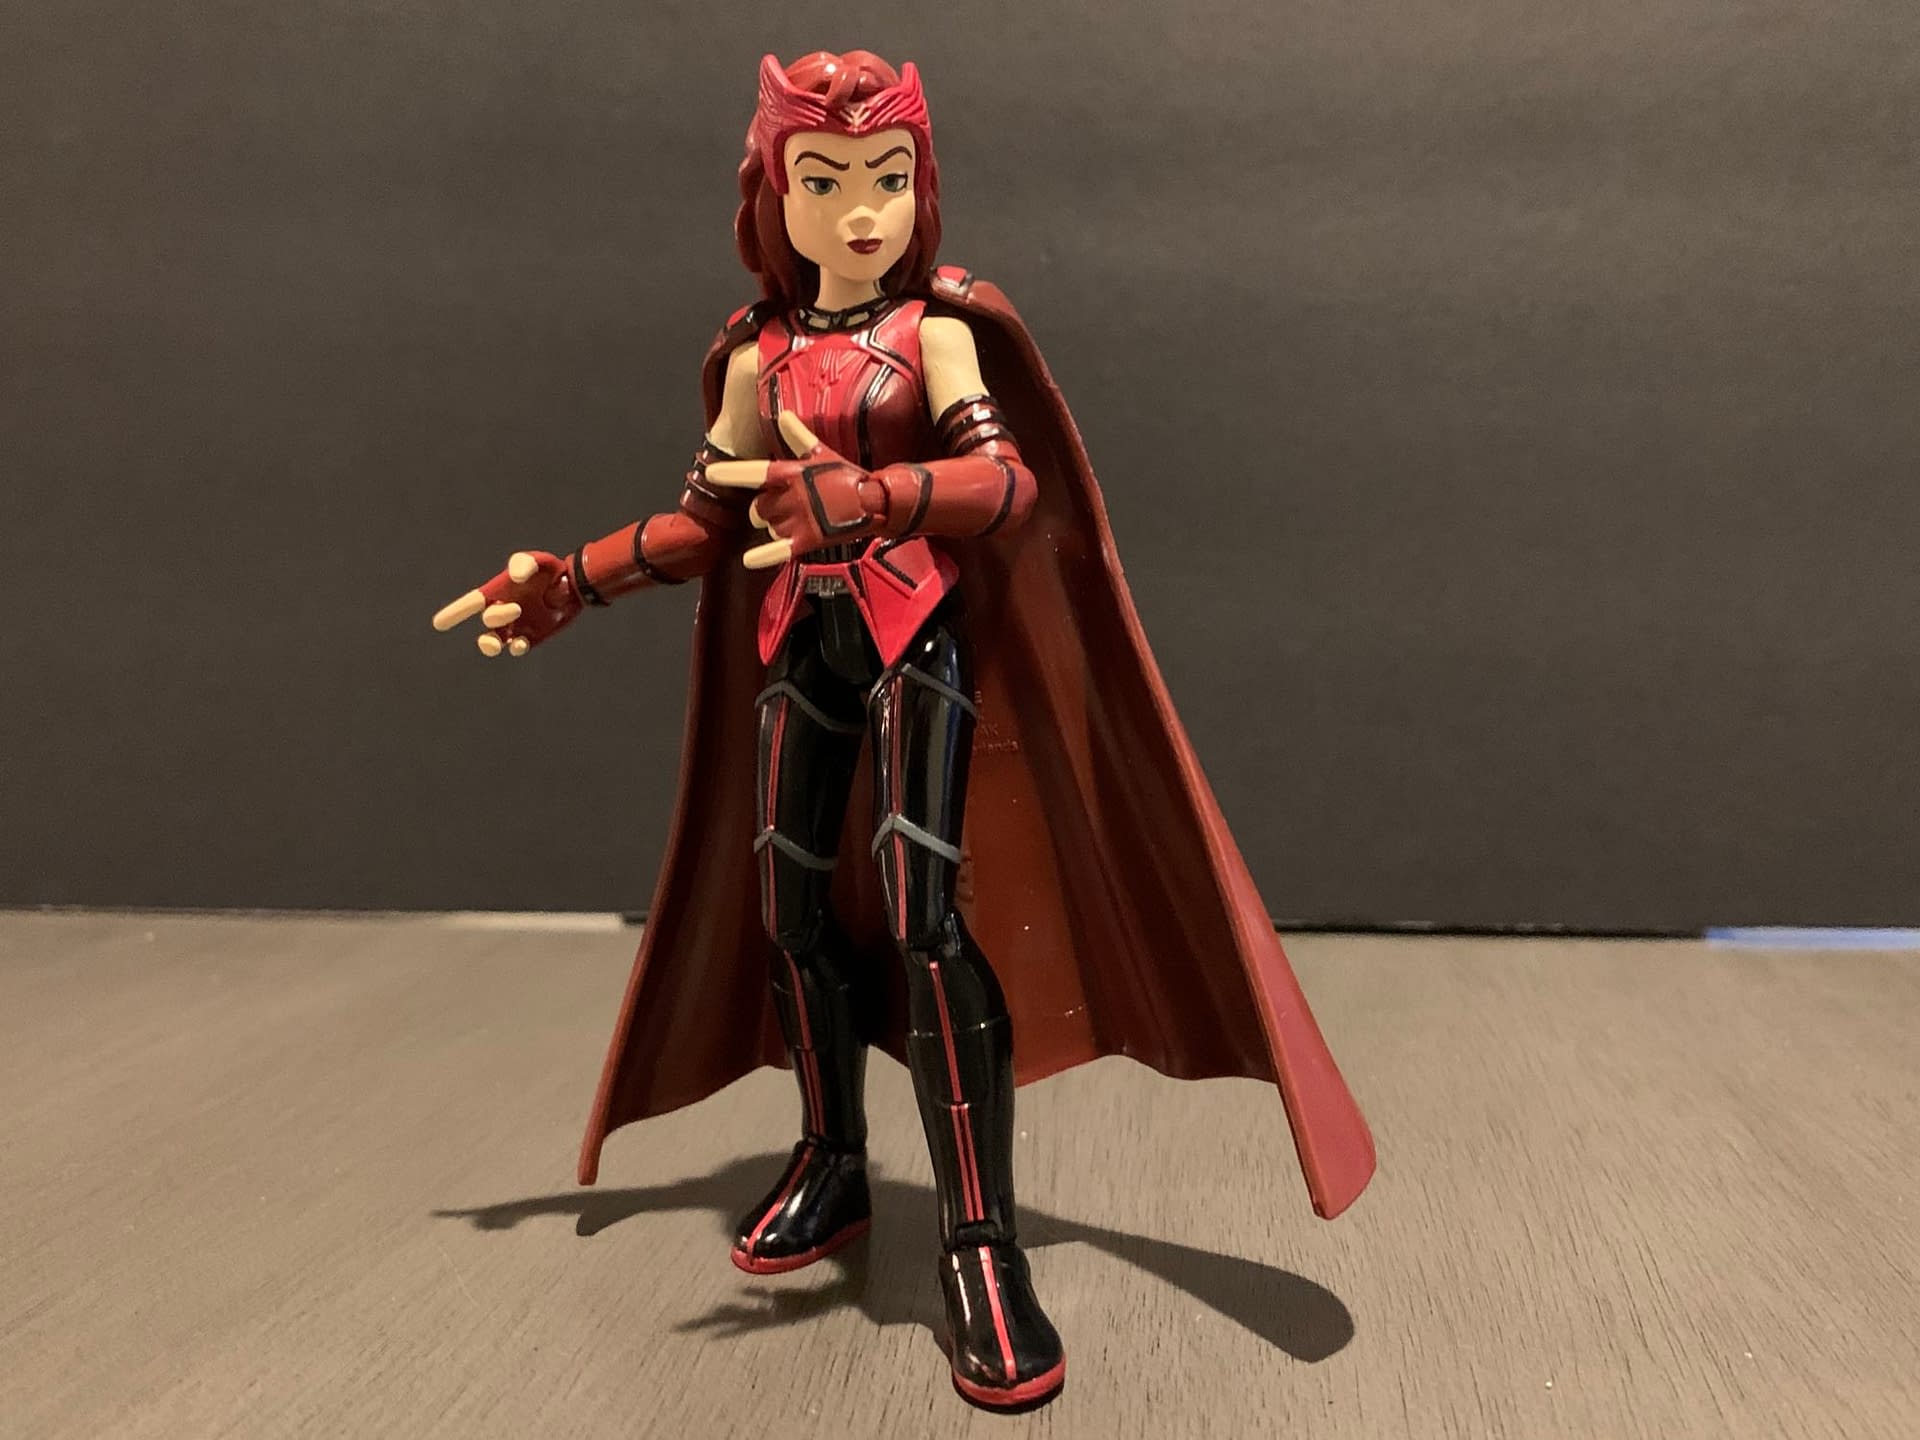 Let's Take A Look AT Disney's Toybox WandaVision Figures